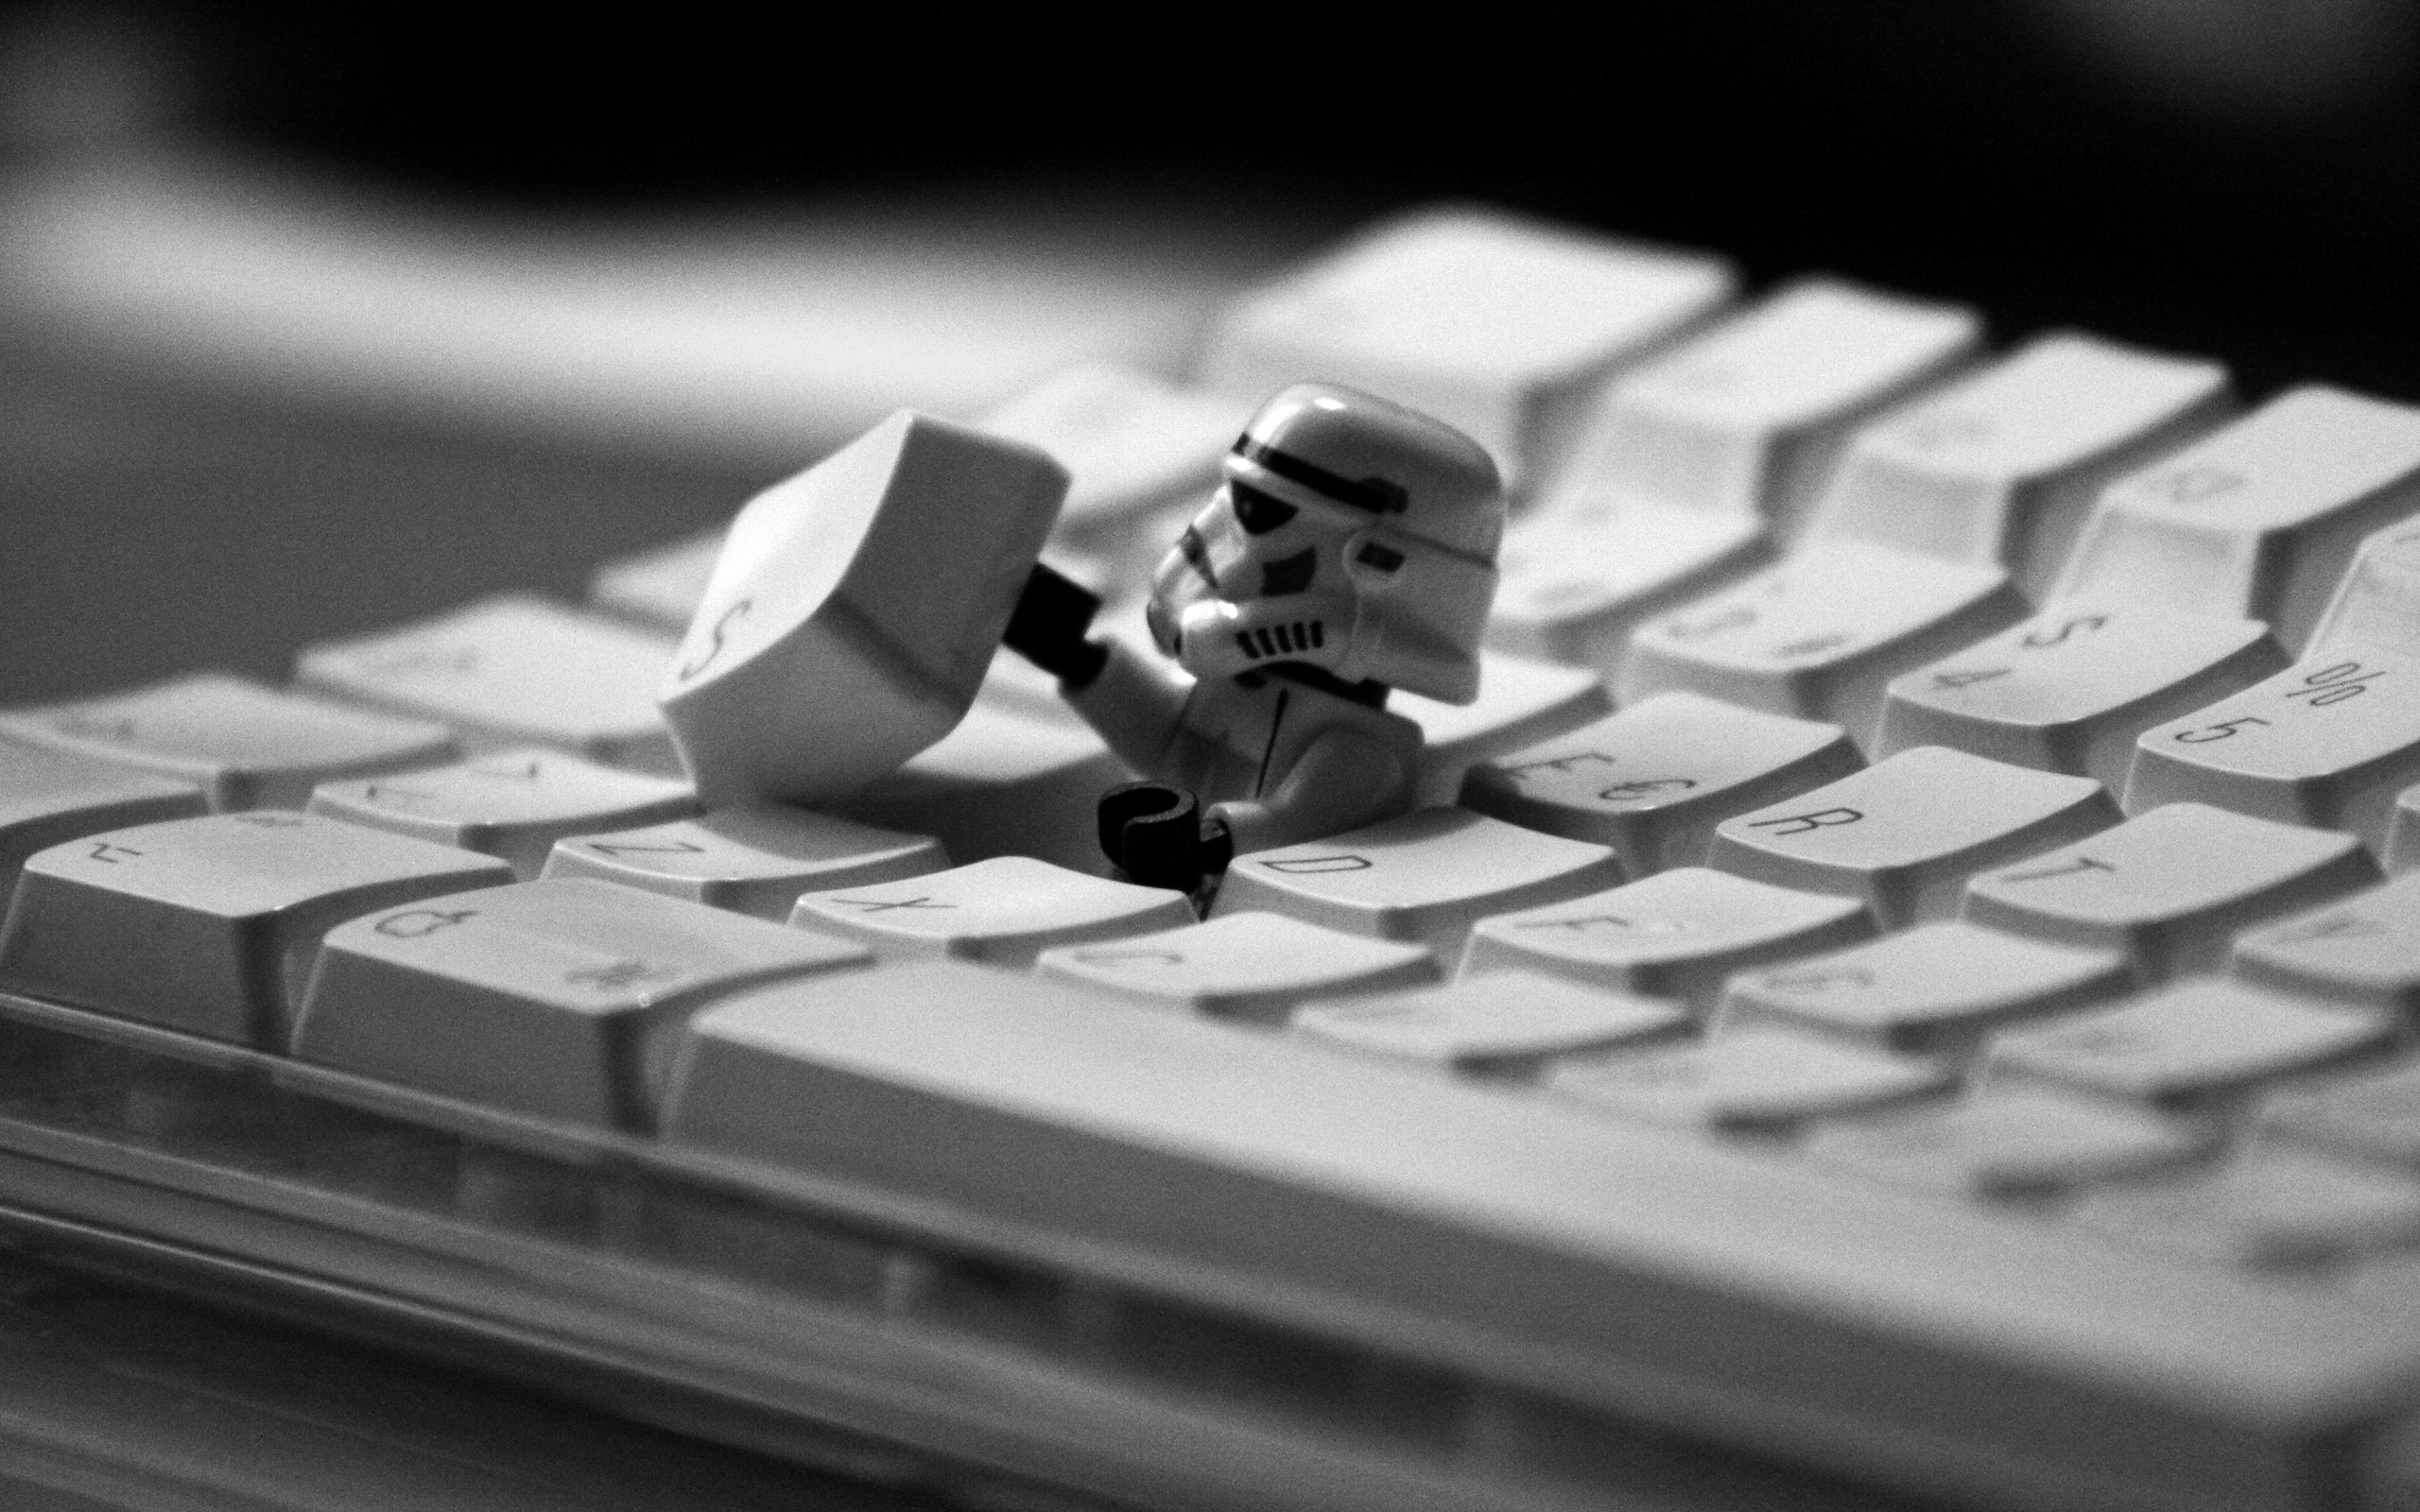 Are Ing Star Wars Lego Stormtroopers Apple Inc Keyboards